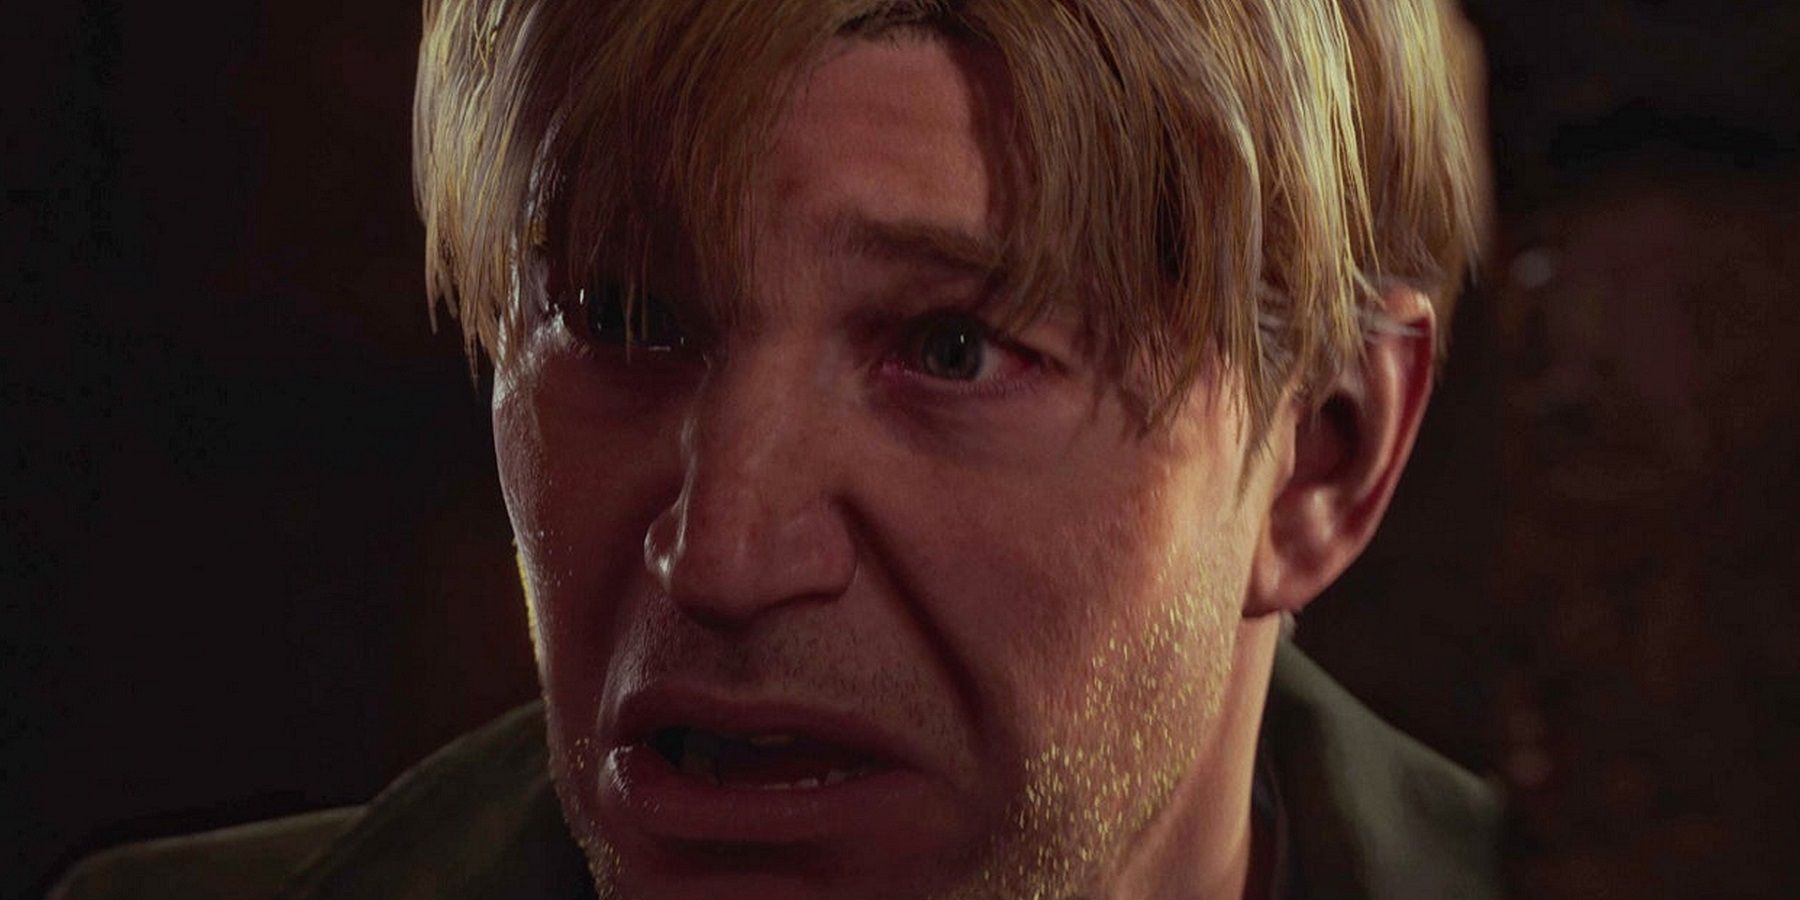 Image from the Silent Hill 2 remake showing a close-up of a concerned James Sunderland.